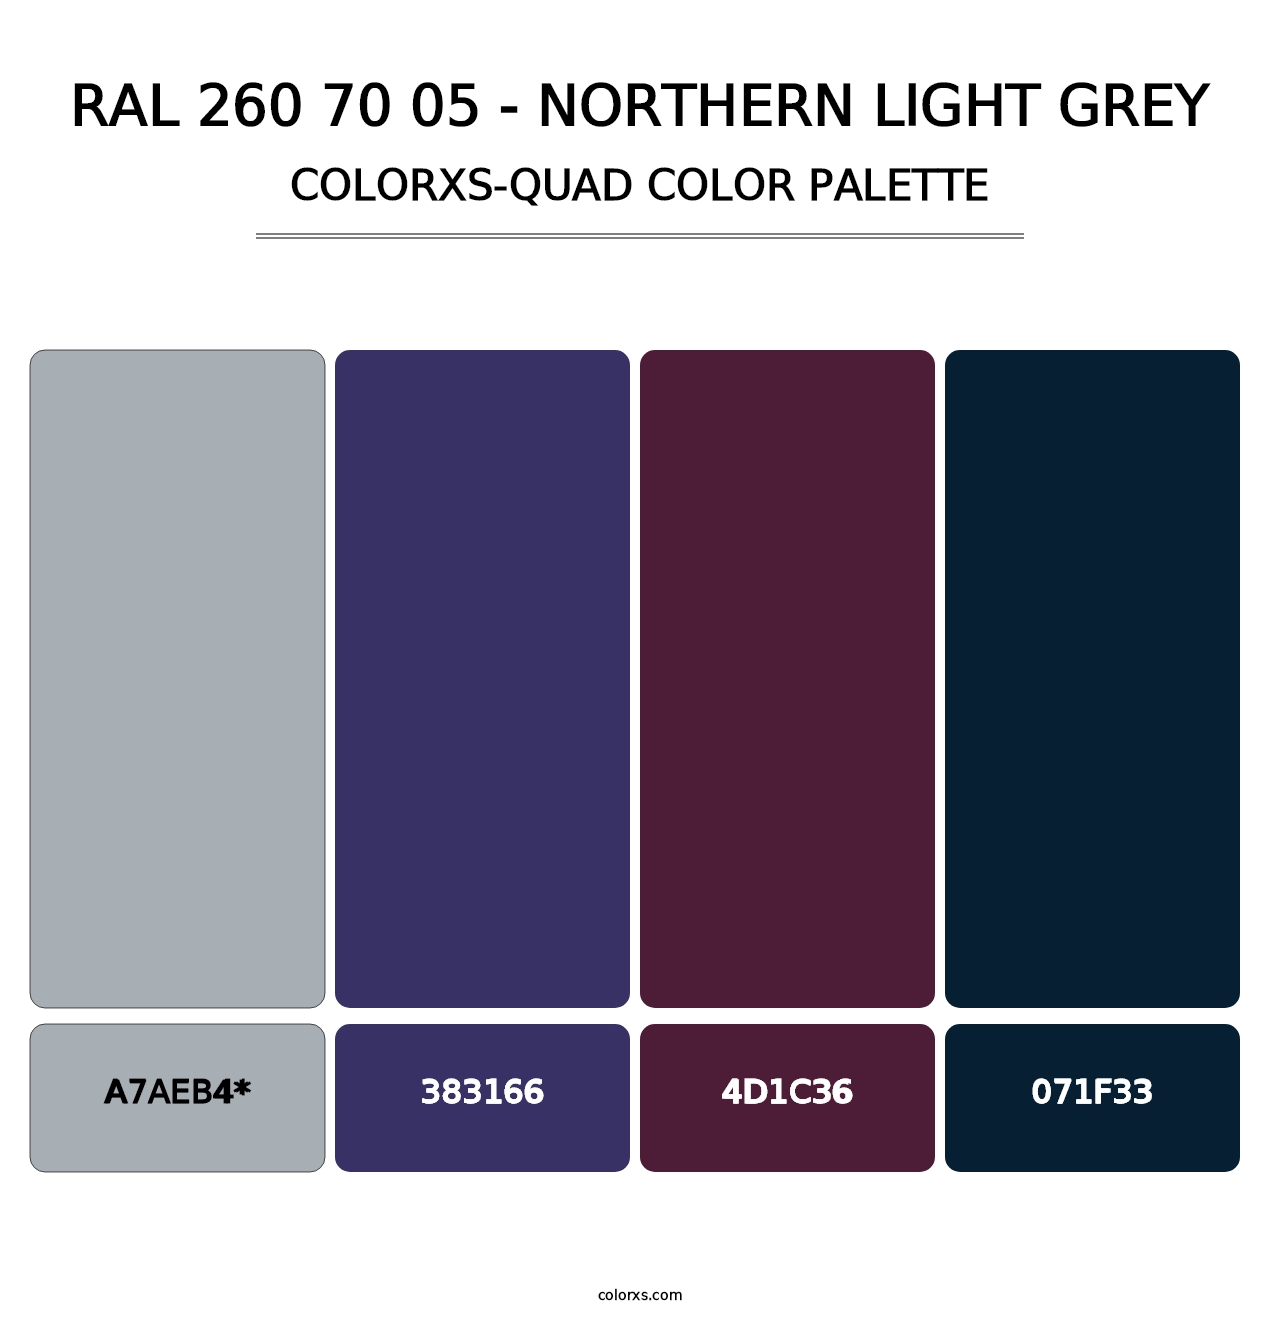 RAL 260 70 05 - Northern Light Grey - Colorxs Quad Palette